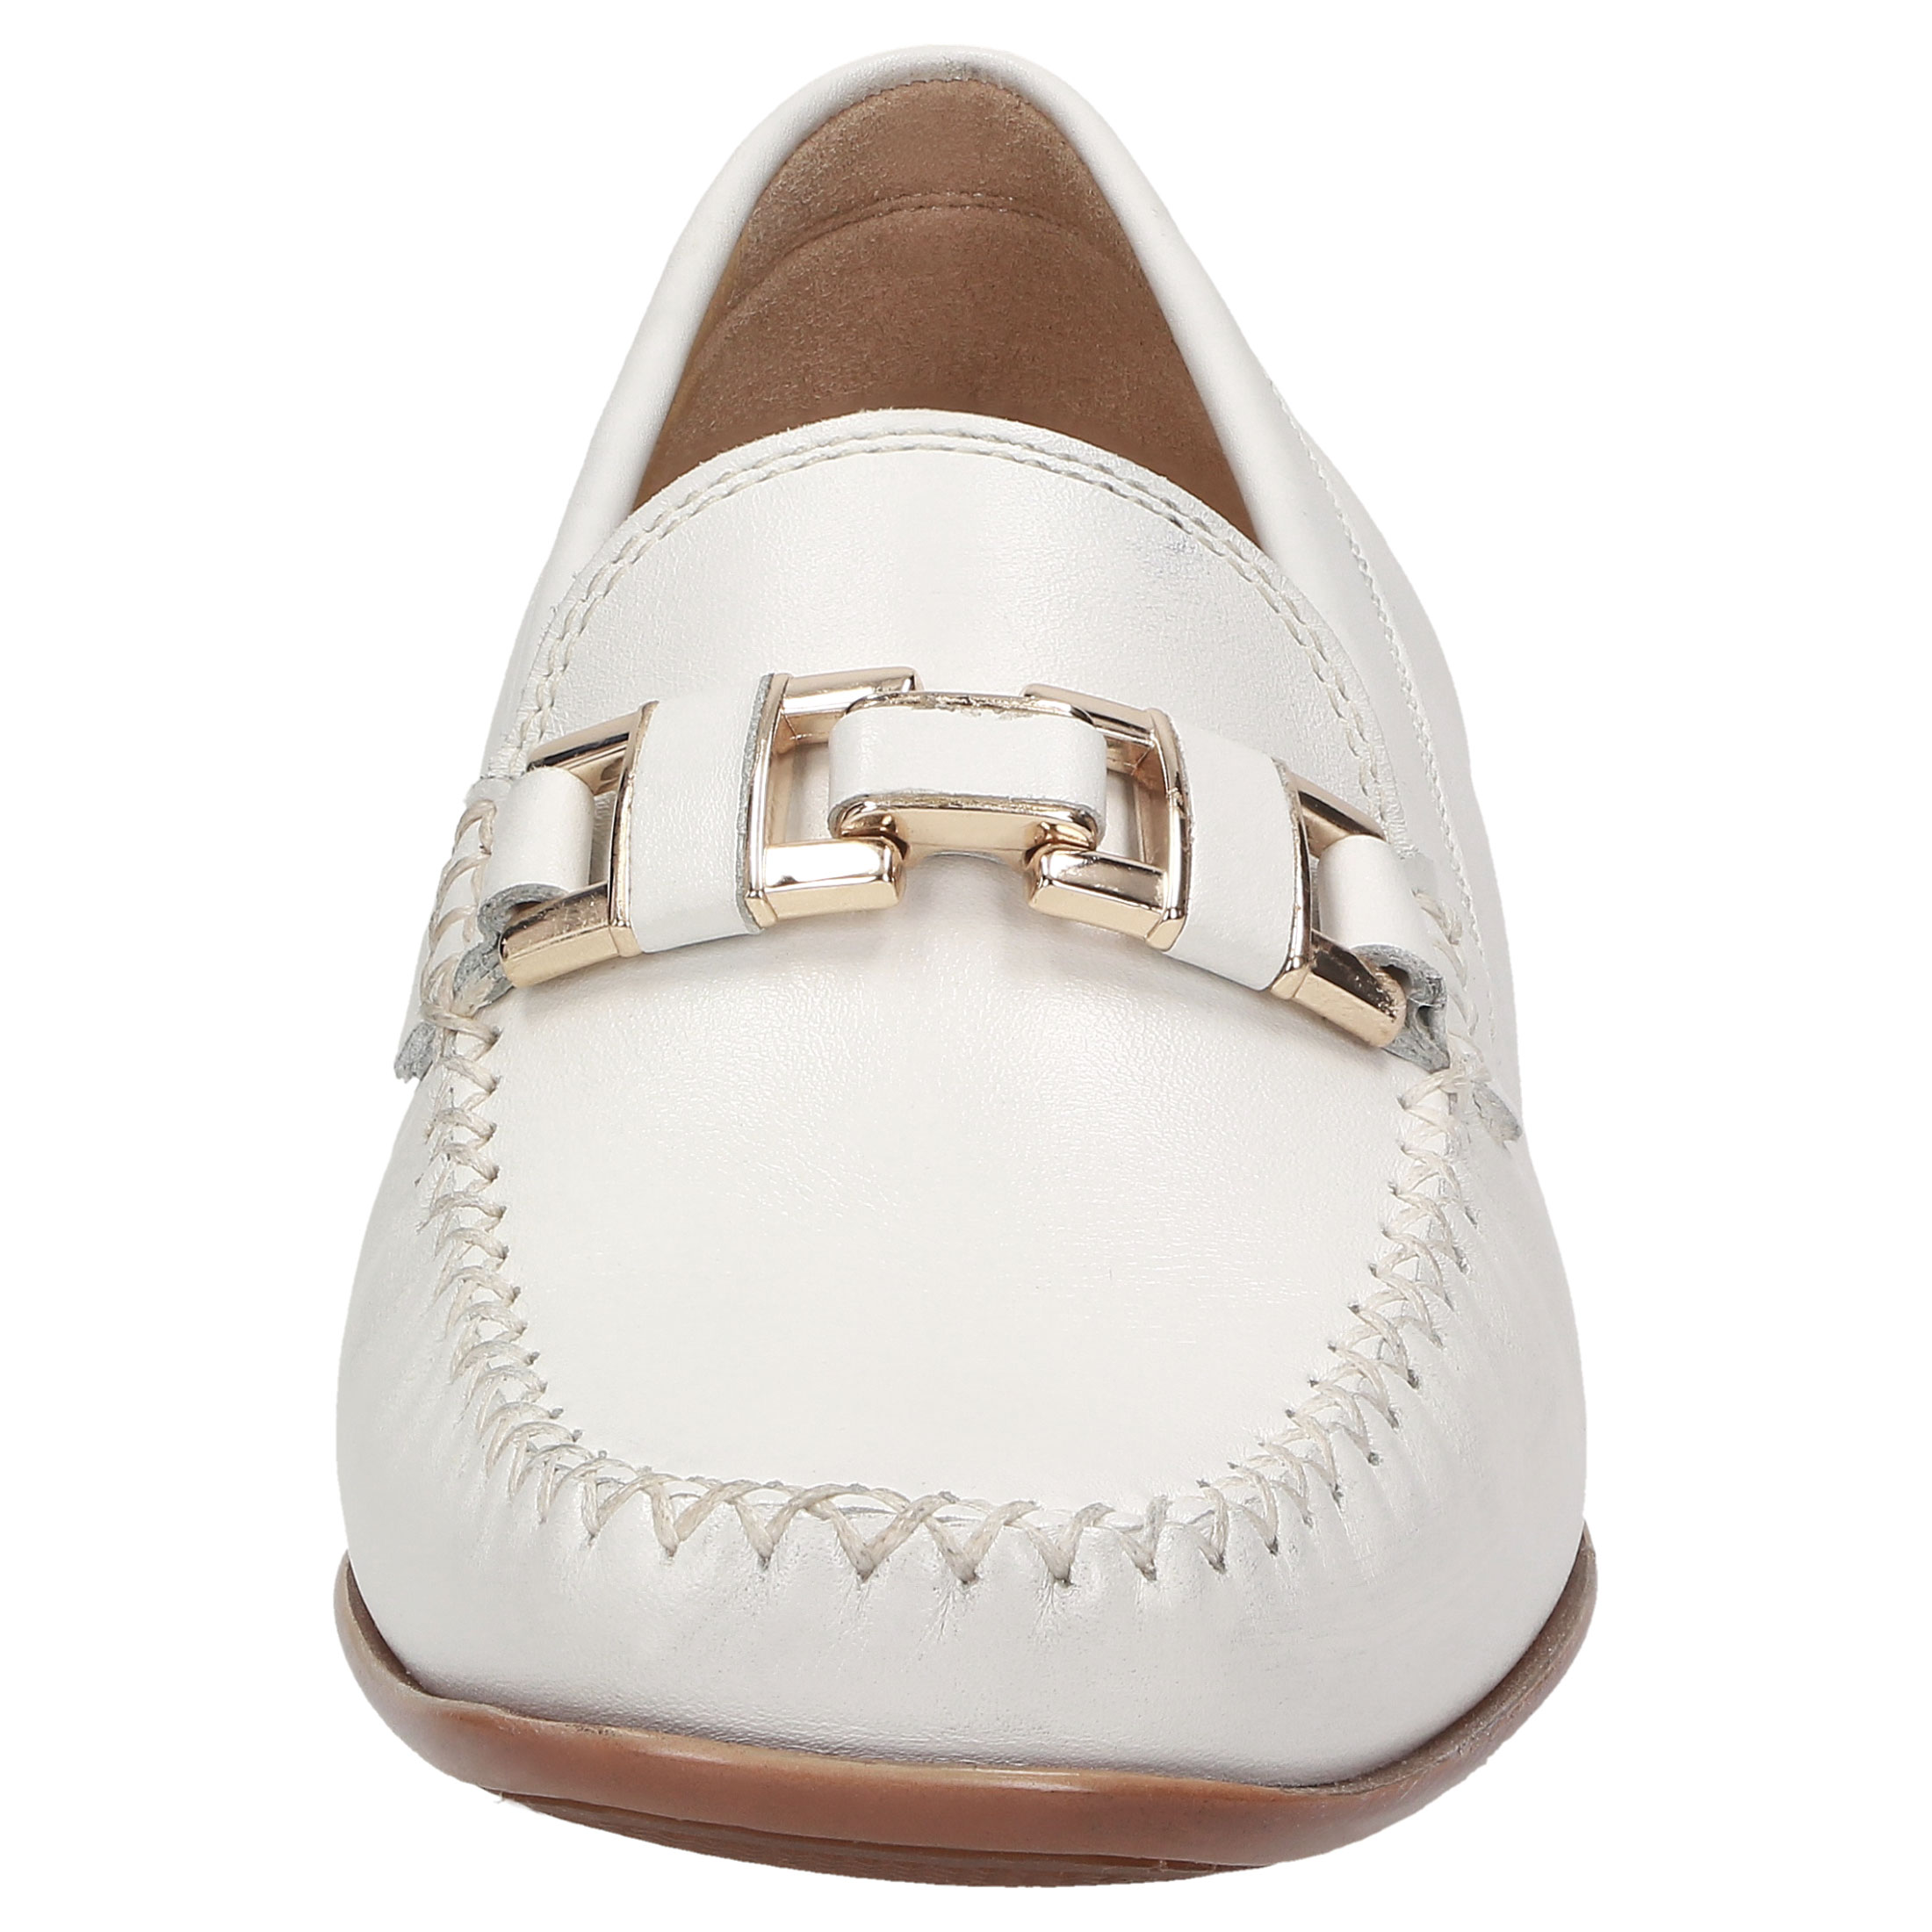 Sioux Cambria - White smooth leather